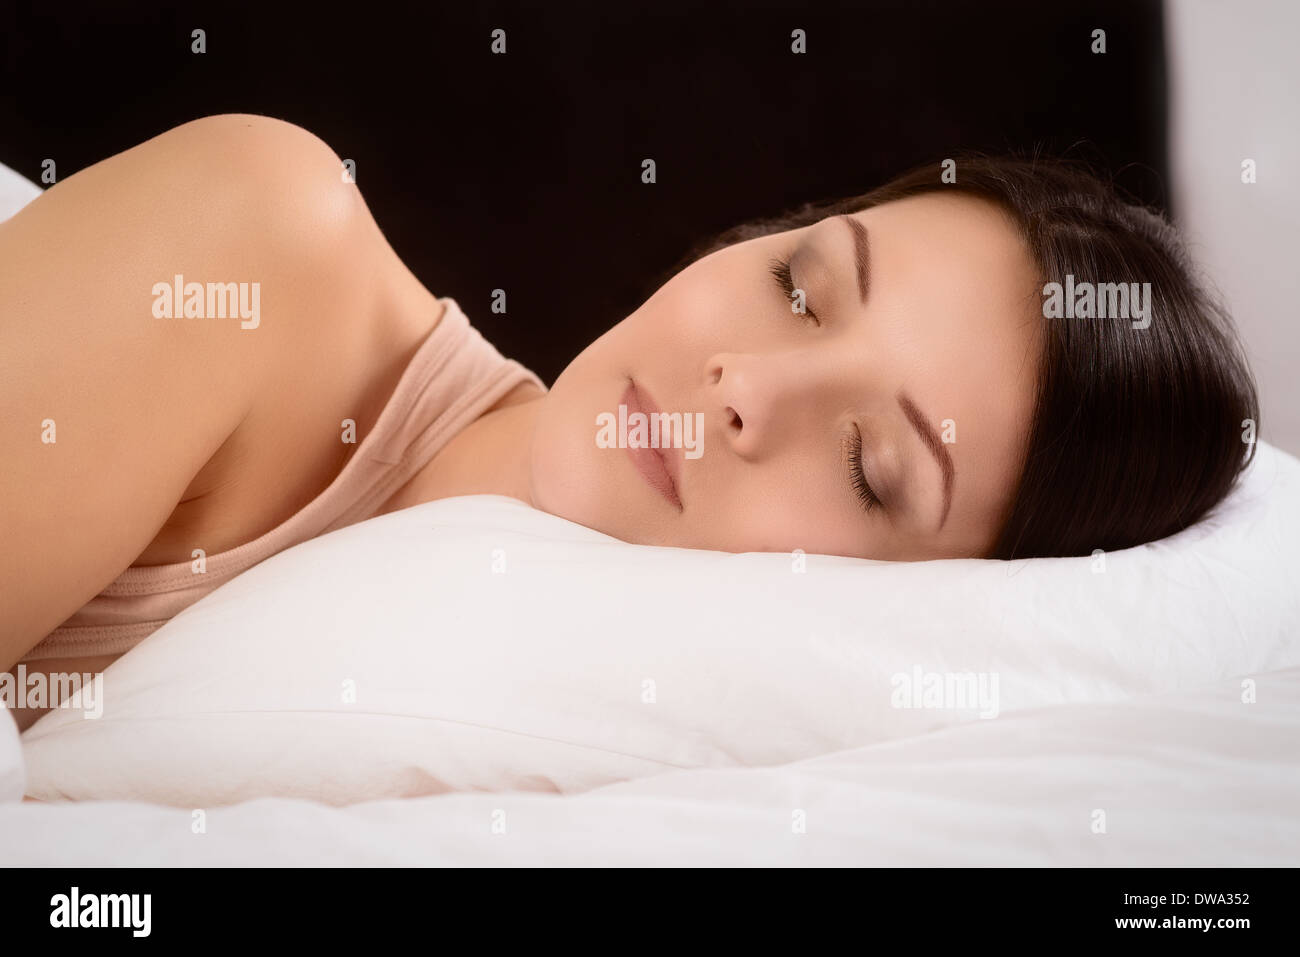 Attractive young woman enjoying a peaceful sleep tucked up in bed dreaming with a serene expression Stock Photo